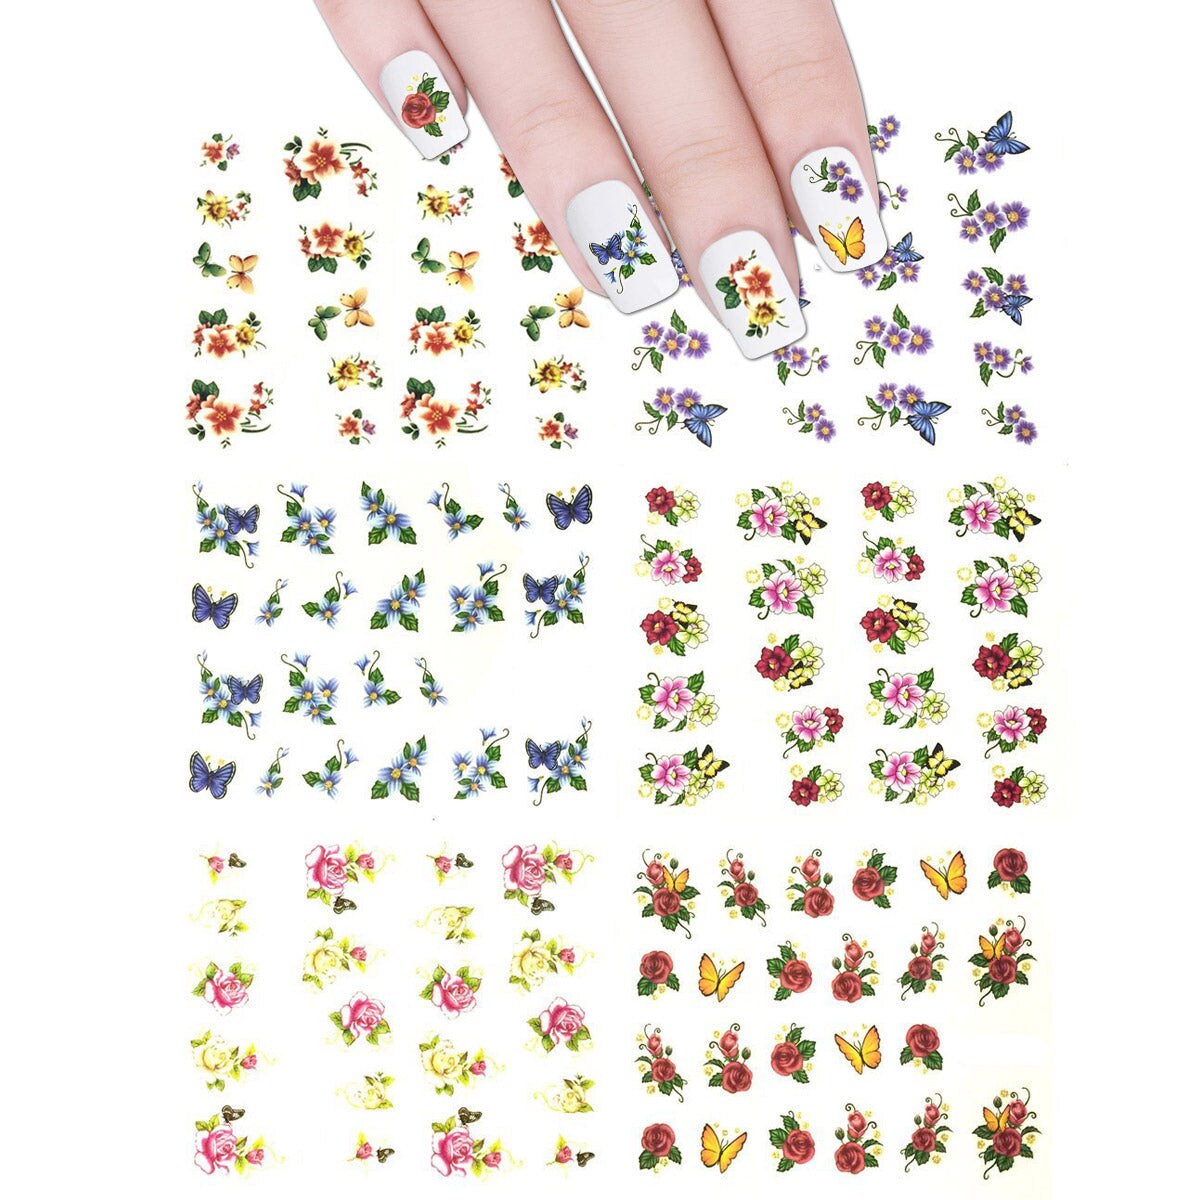 Wrapables Nail Art Water Nail Stickers Water Transfer Stickers / Nail Art Tattoos / Nail Art Decals, Flowers &#x26; Butterflies (6 Sheets)